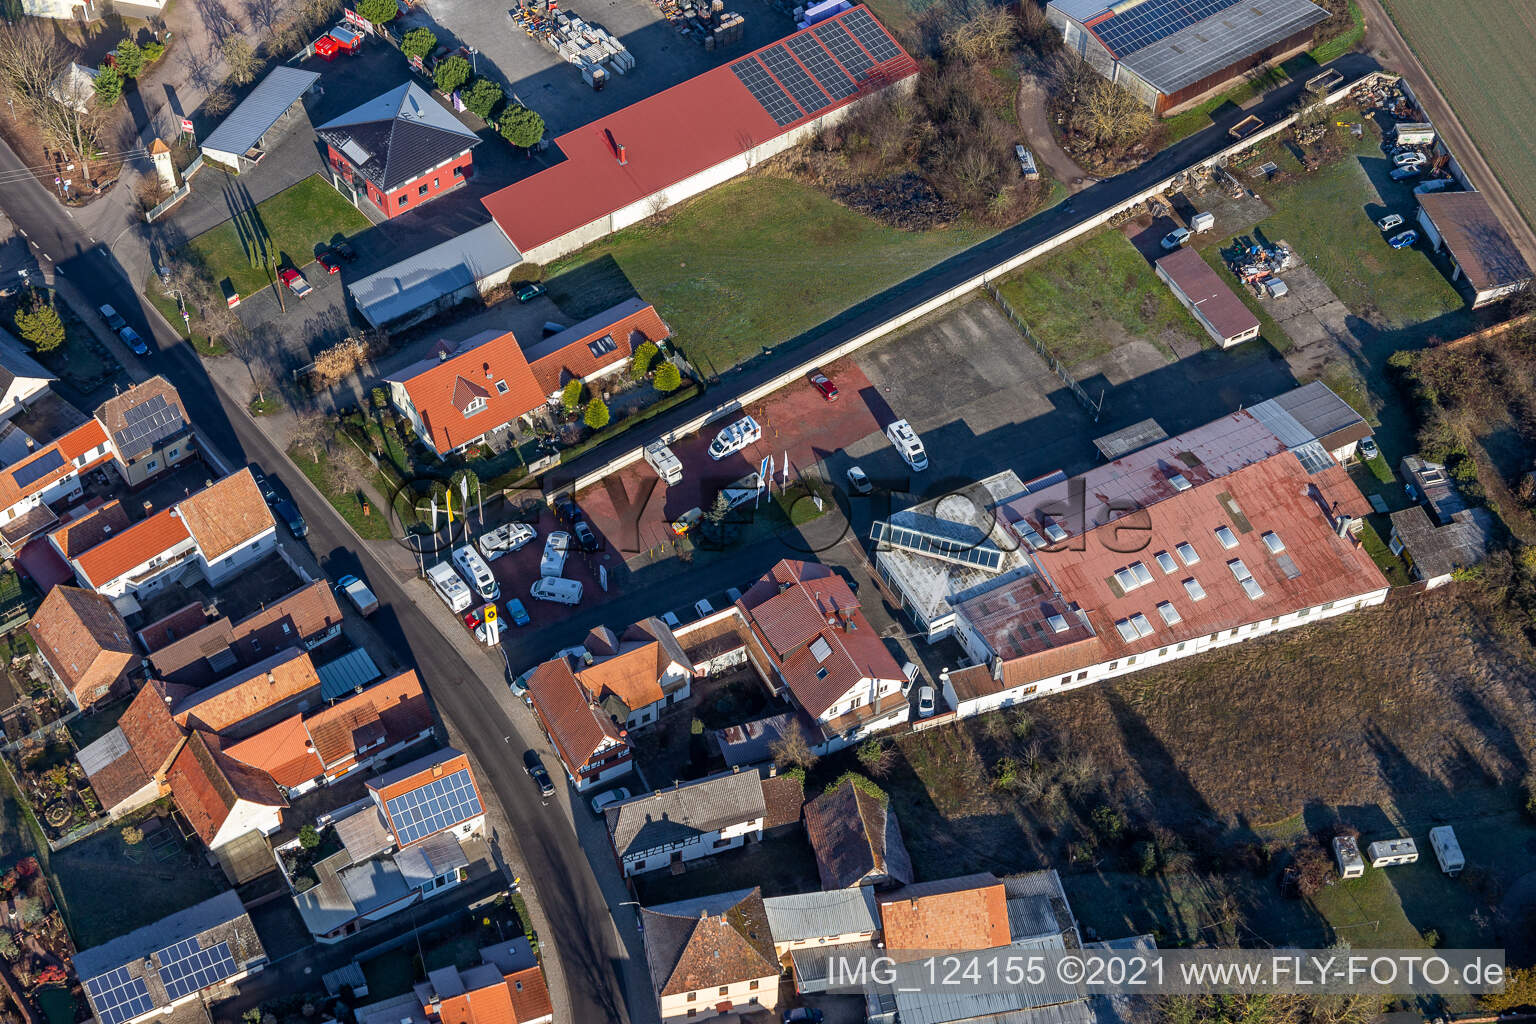 Aerial view of Frey car dealership in Minfeld in the state Rhineland-Palatinate, Germany